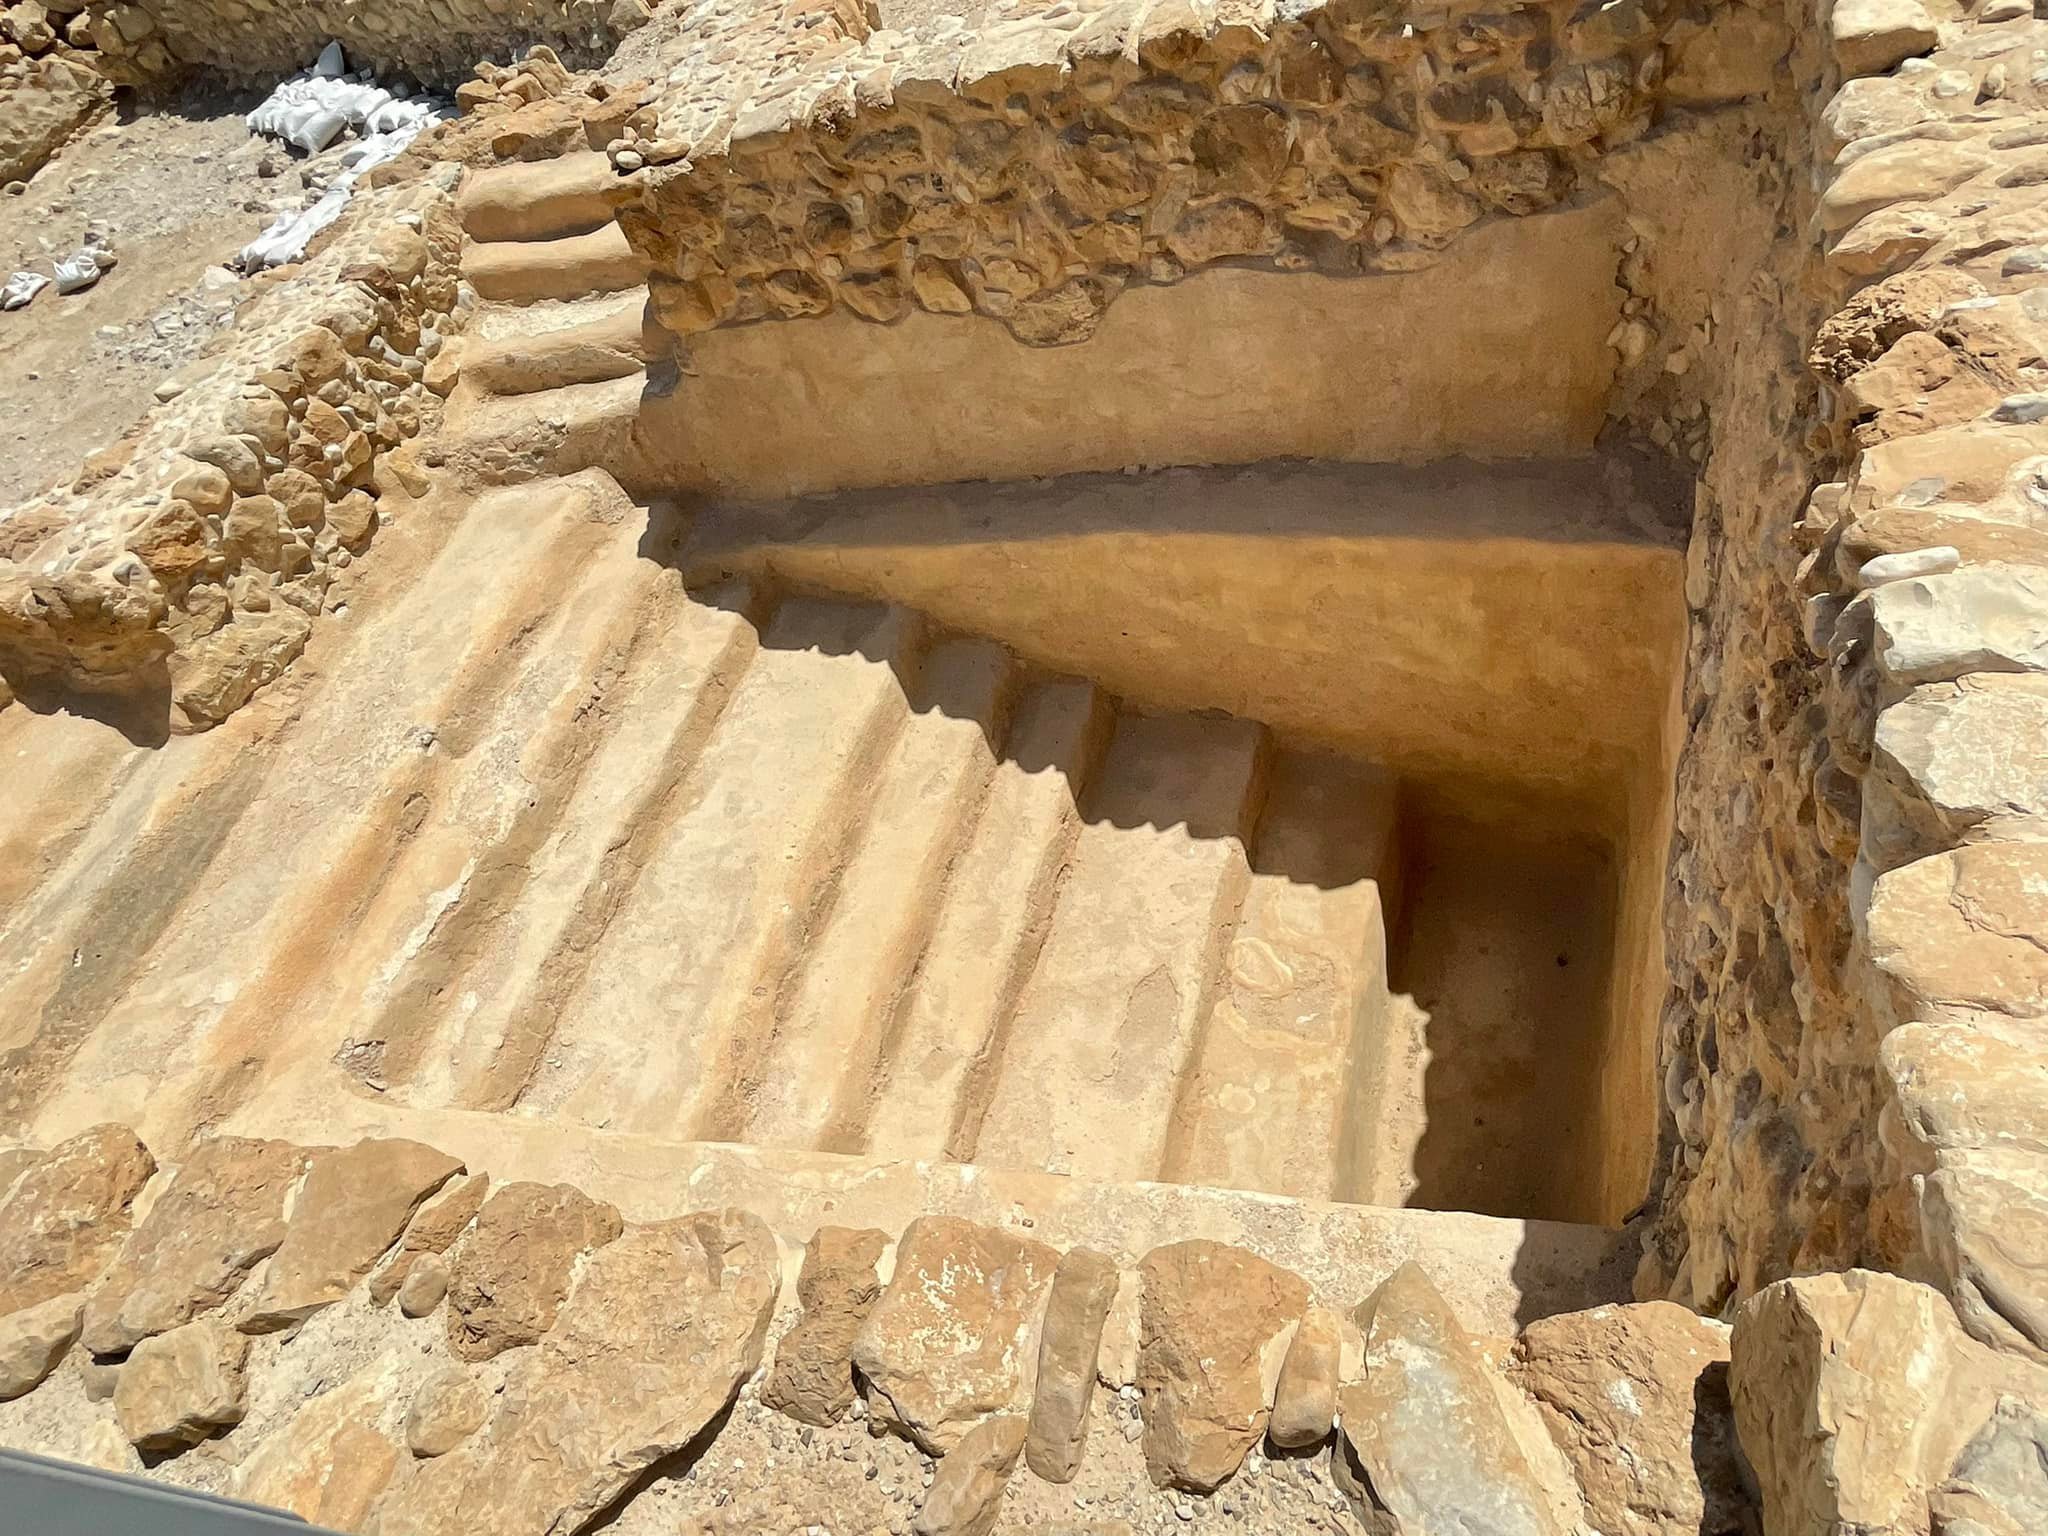  Although there is no known connection between them, like John the Baptist this community practiced ritual washing with one set of steps into the cleansing pool, and another set to exit. 